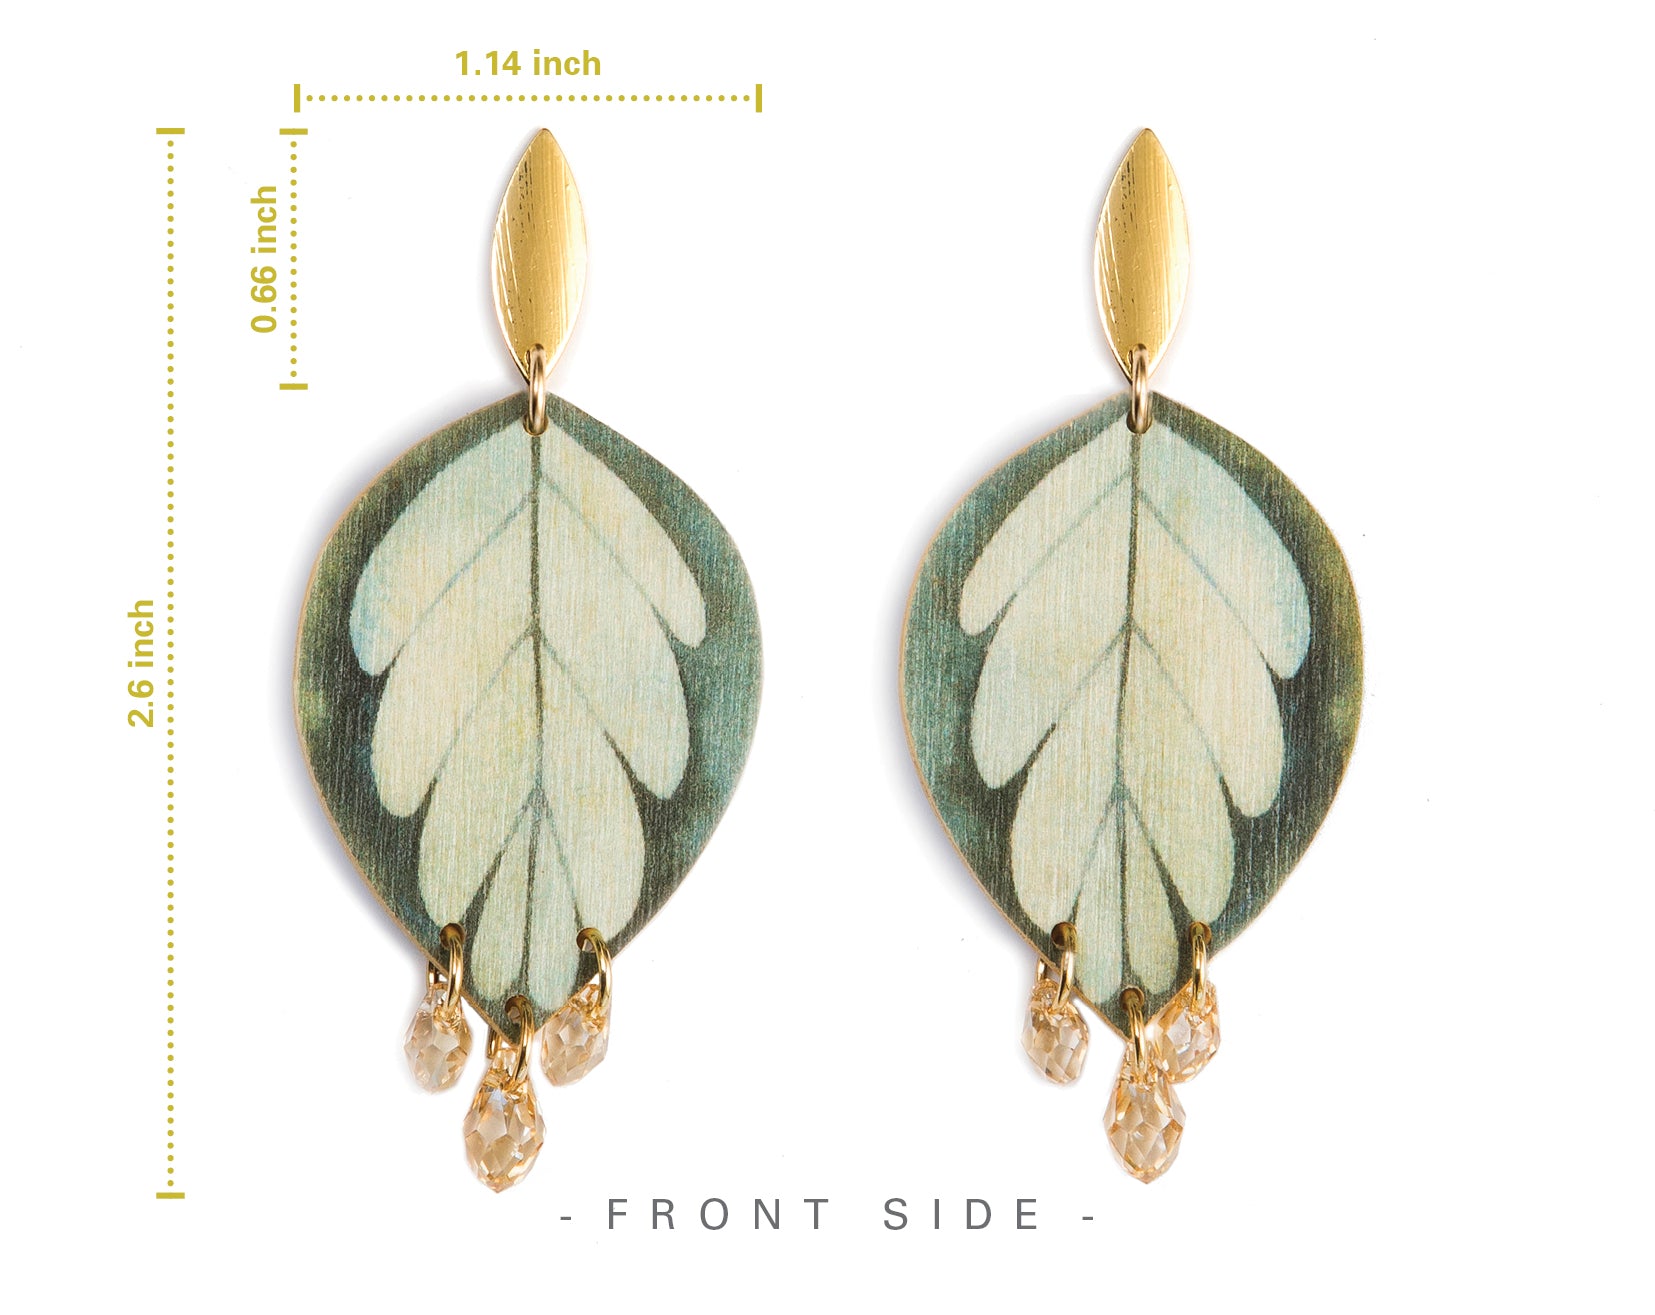 Buy Online Premium Quality Plant Earrings For Plant Lover - Plant Lady Gift - Leaf Shape with Swarovski Crystals,Earrings, Urban Jungle Life